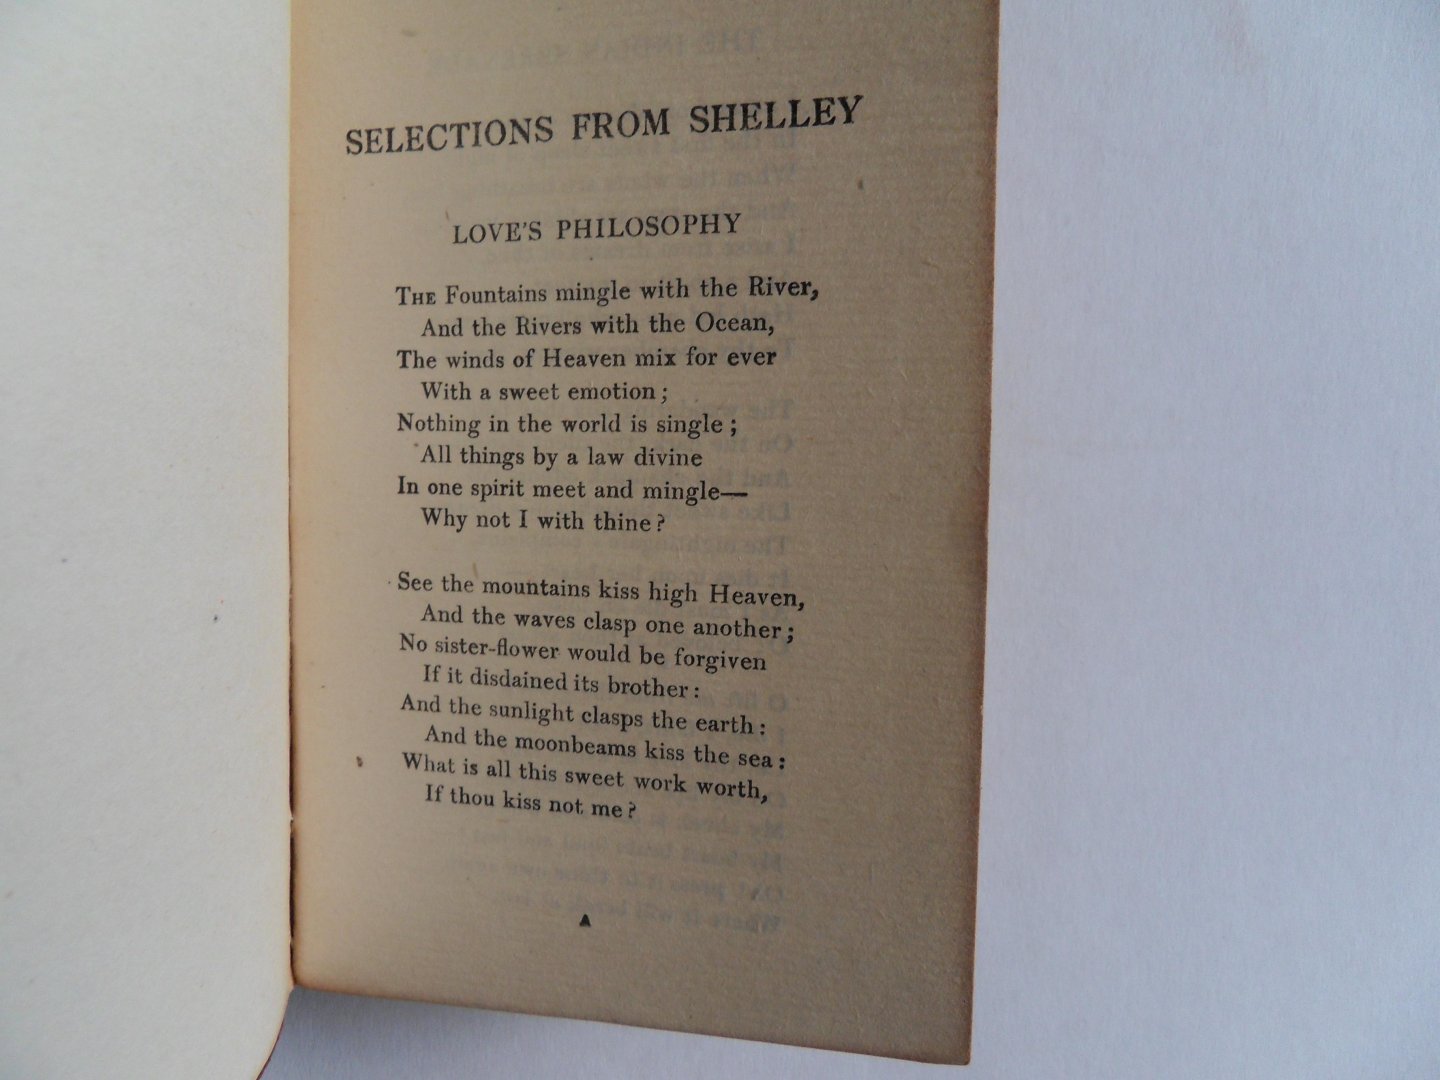 Landells, William M.A. - Selections from Shelley.